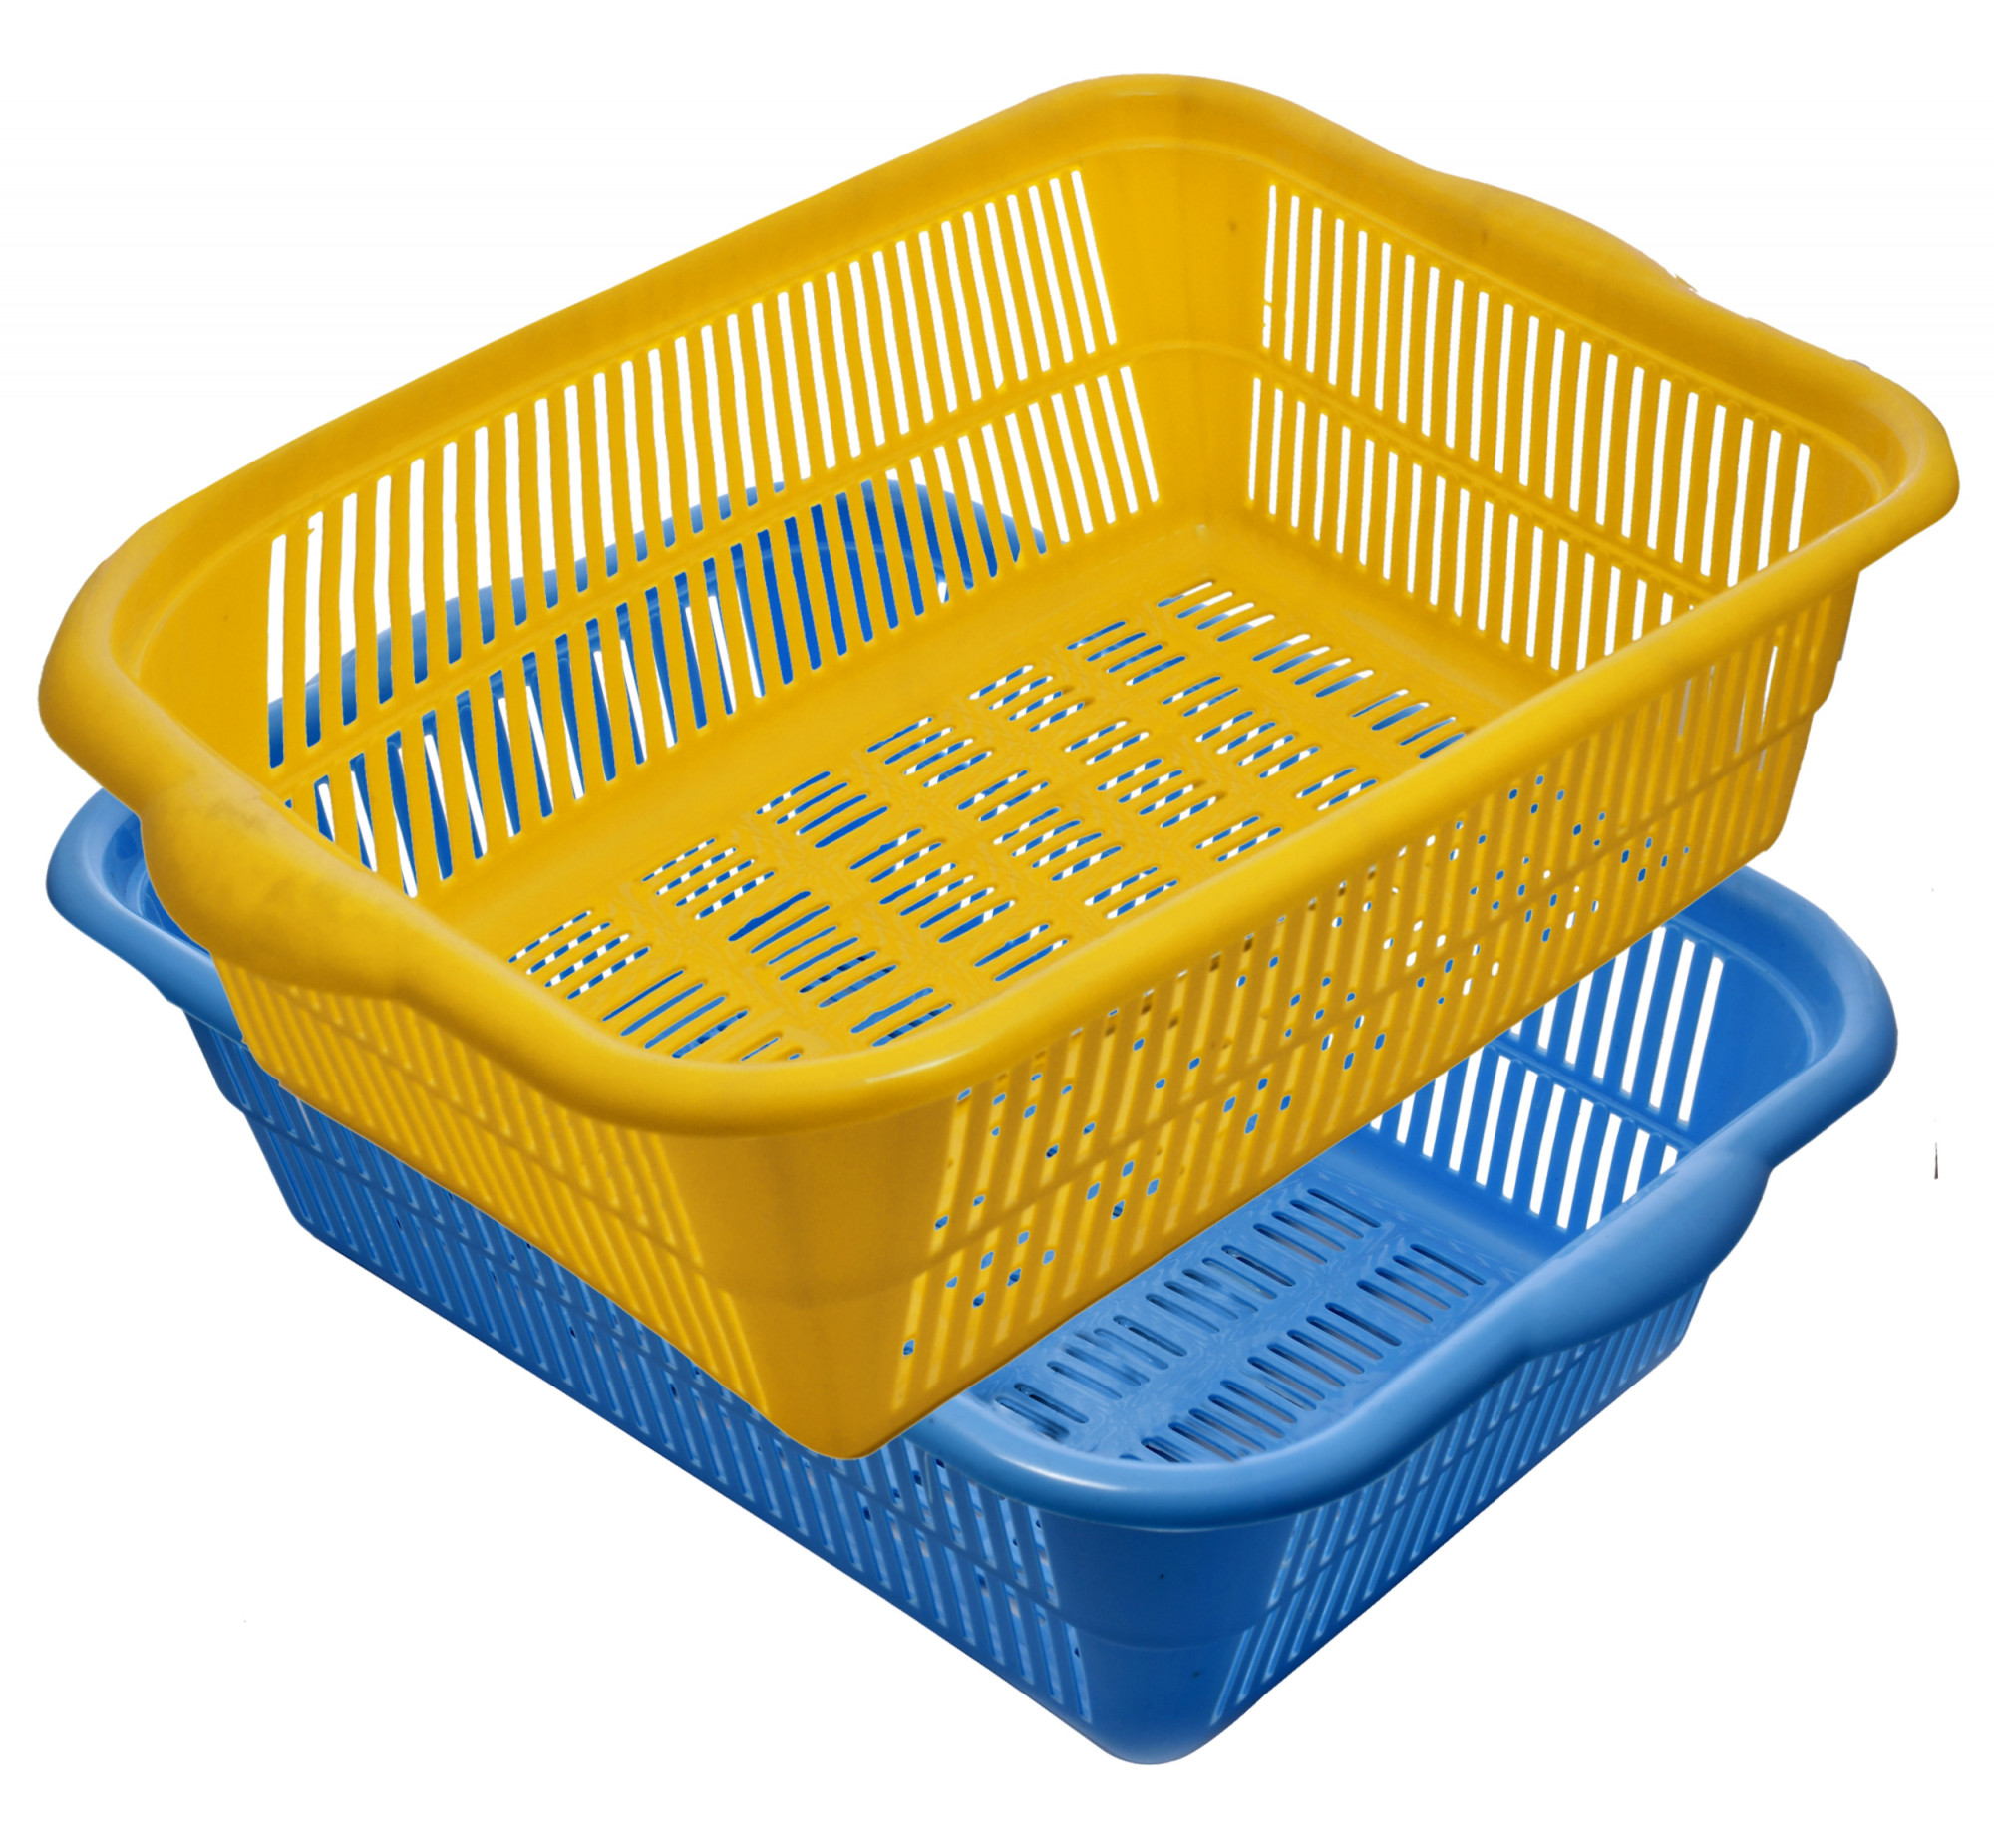 Kuber Industries 2 Pieces Plastic Kitchen Dish Rack Drainer Vegetables And Fruits Basket Dish Rack Multipurpose Organizers ,Large Size,Blue & Yellow